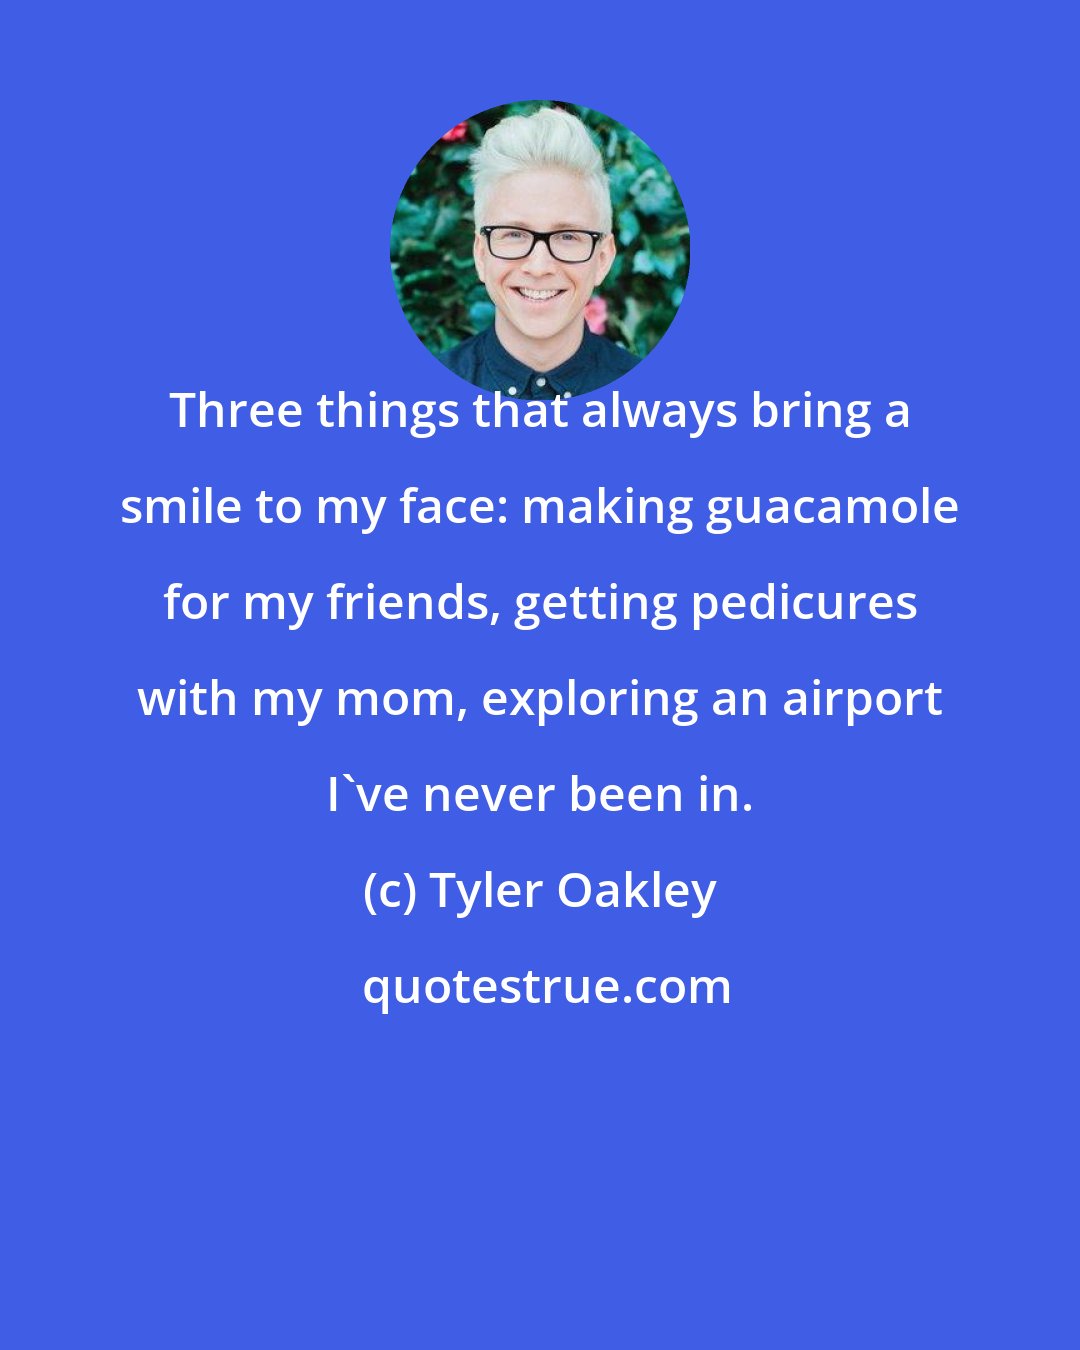 Tyler Oakley: Three things that always bring a smile to my face: making guacamole for my friends, getting pedicures with my mom, exploring an airport I've never been in.